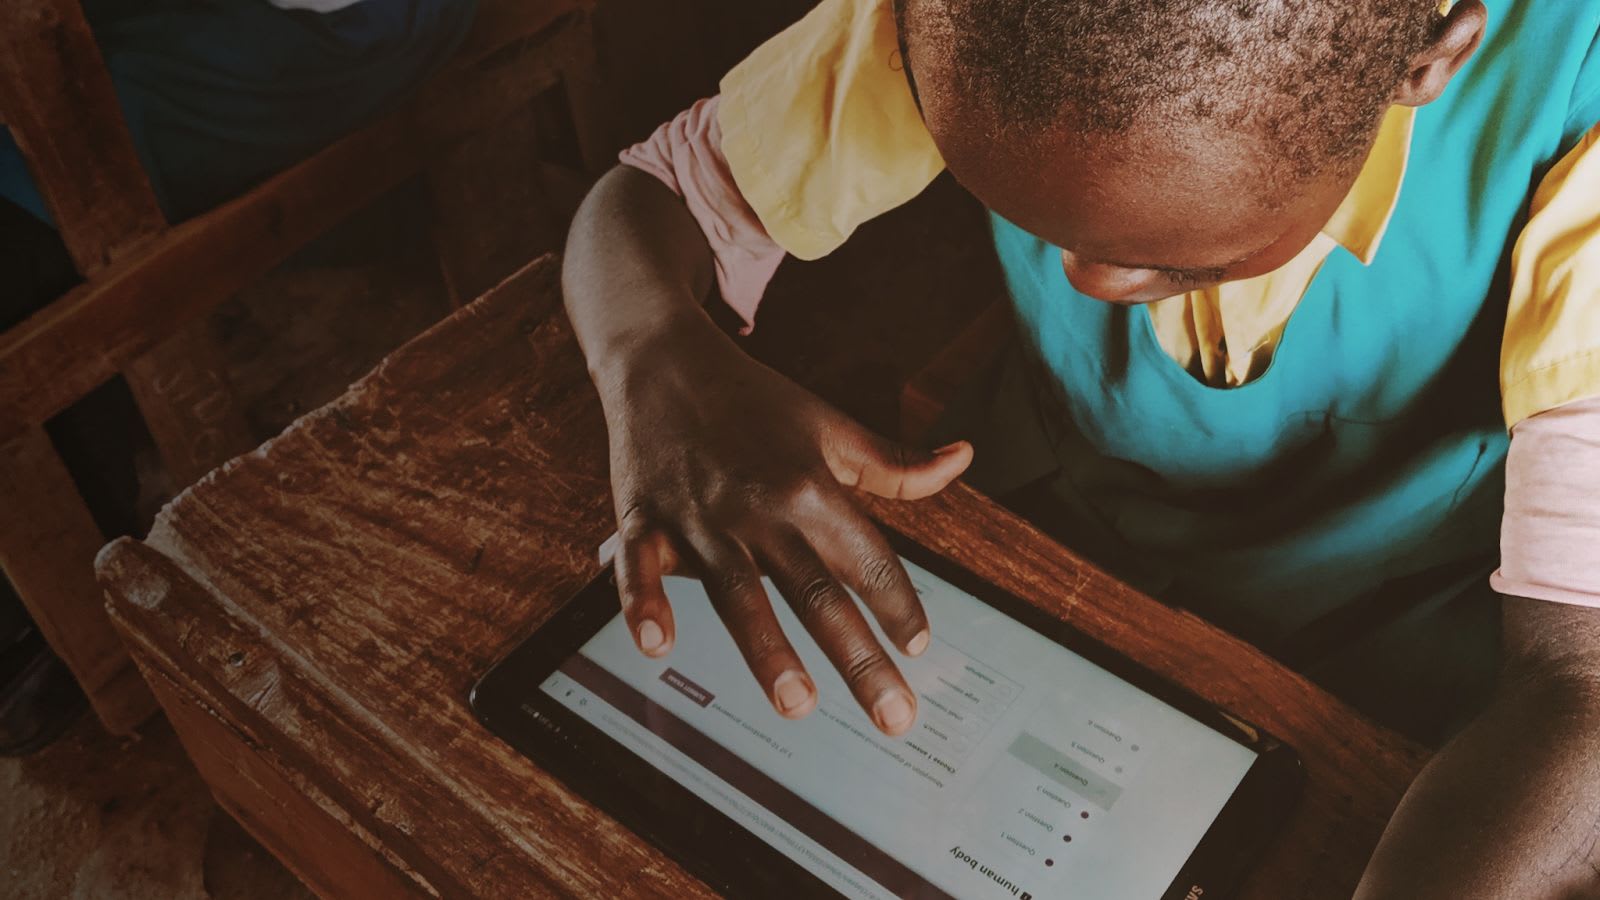 From above, we see the close-up of a learner sitting at his school desk, solving a math problem on a tablet. He’s in his school uniform, blue and yellow, the desk is a wooden desk.